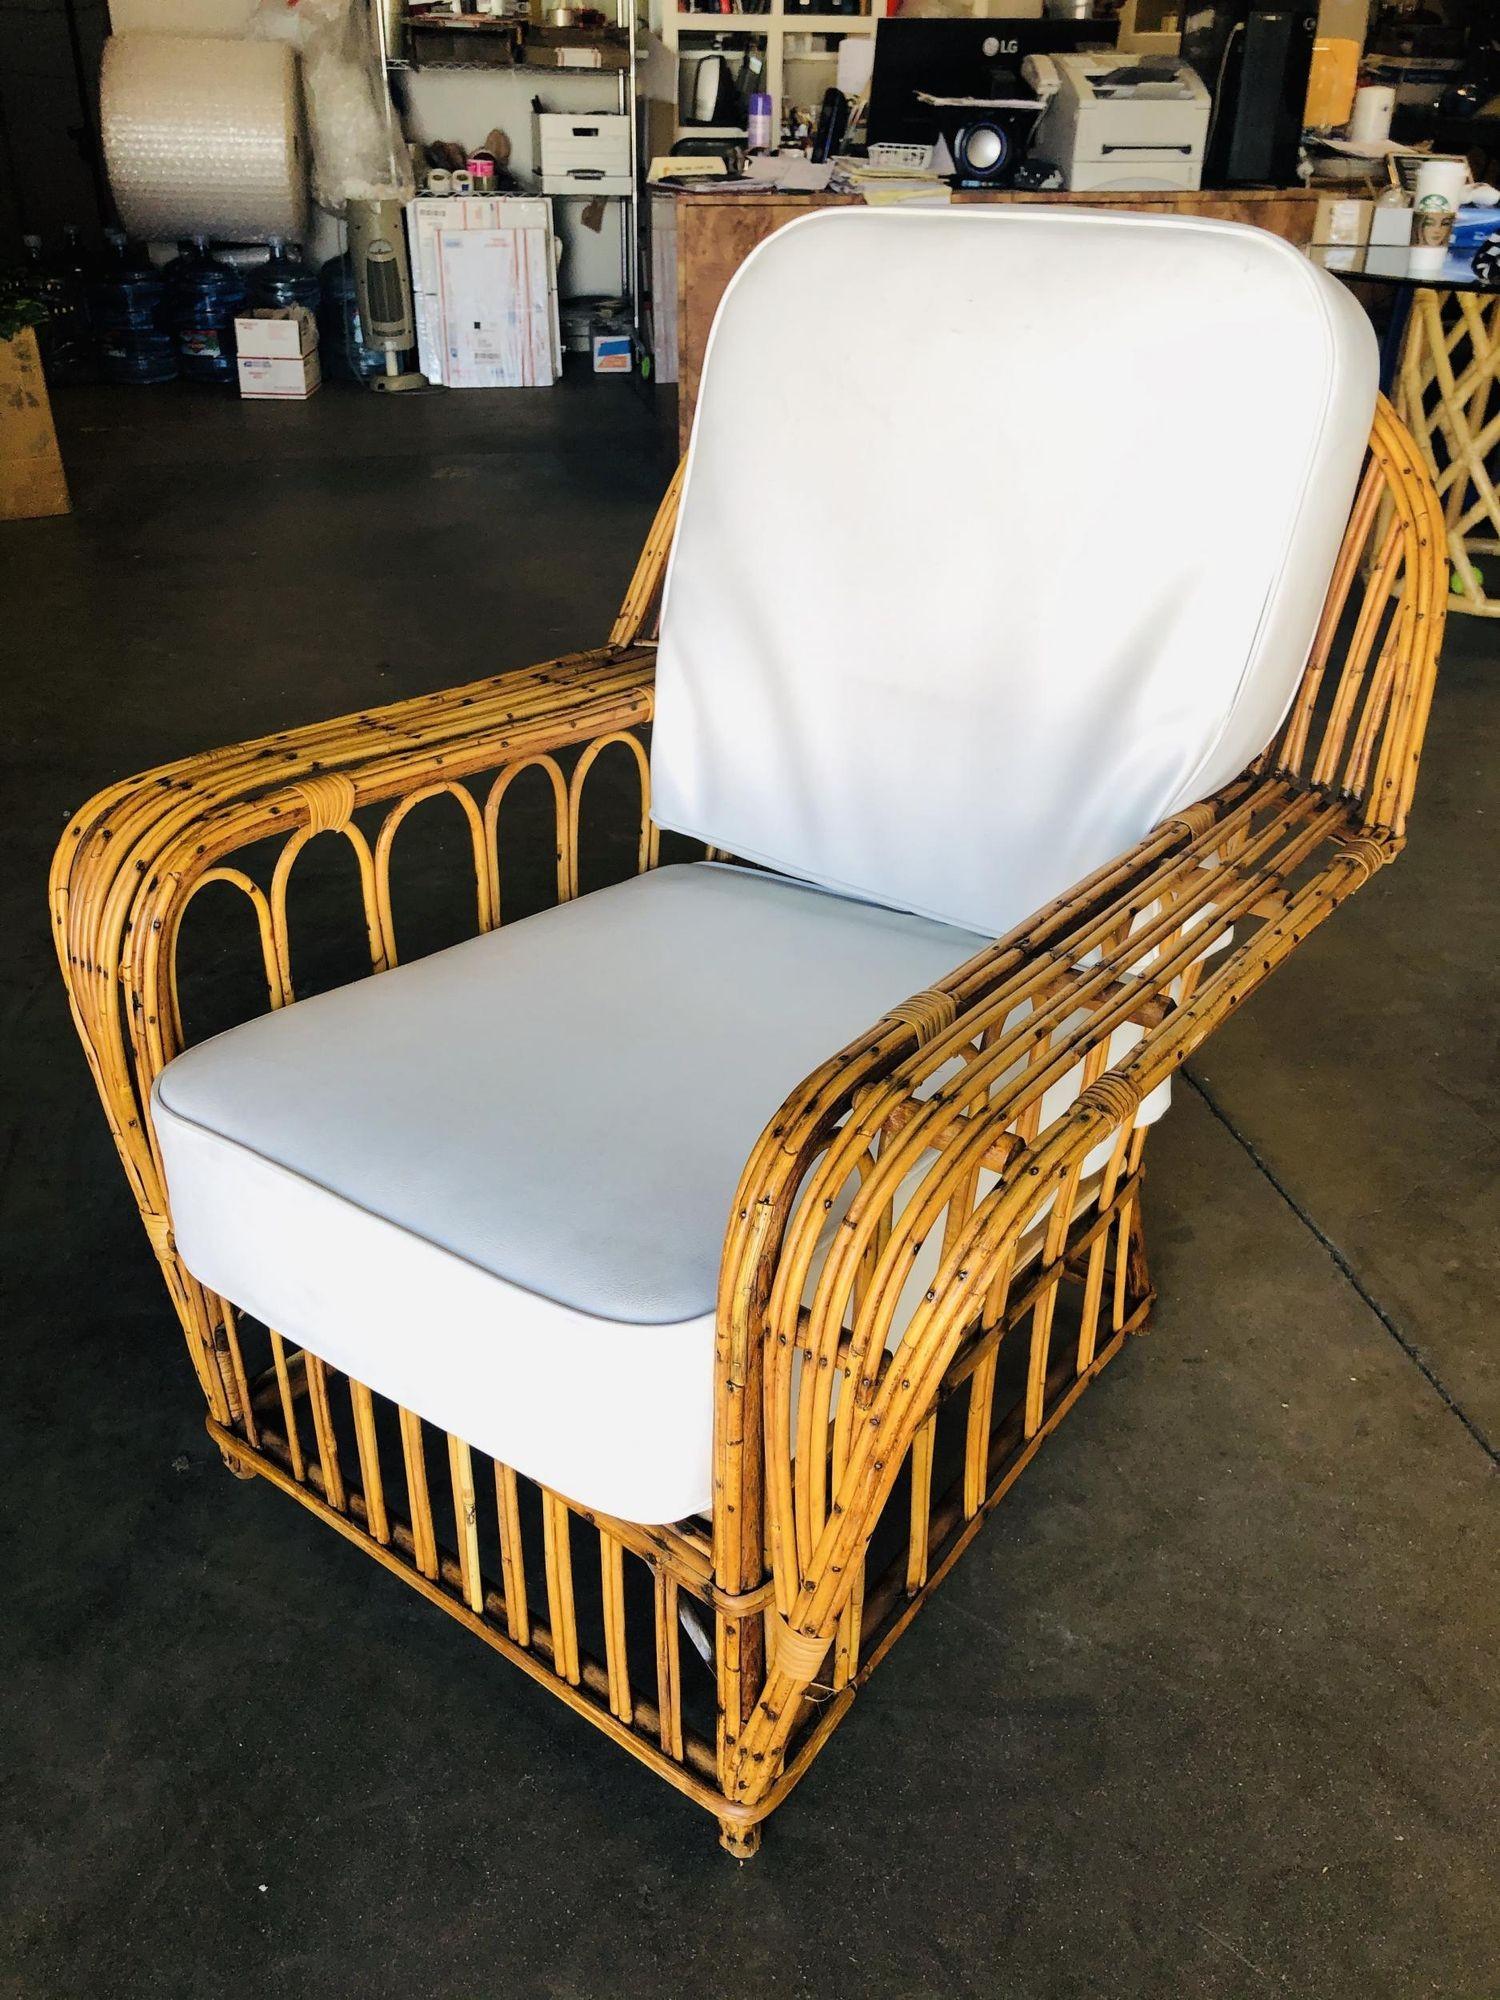 This Art Deco era rattan lounge chair with multi-strand stick rattan arms forming Gothic cathedral style arches along the side with a cobra-shaped seat back.

1930, United States

We only purchase and sell only the best and finest rattan